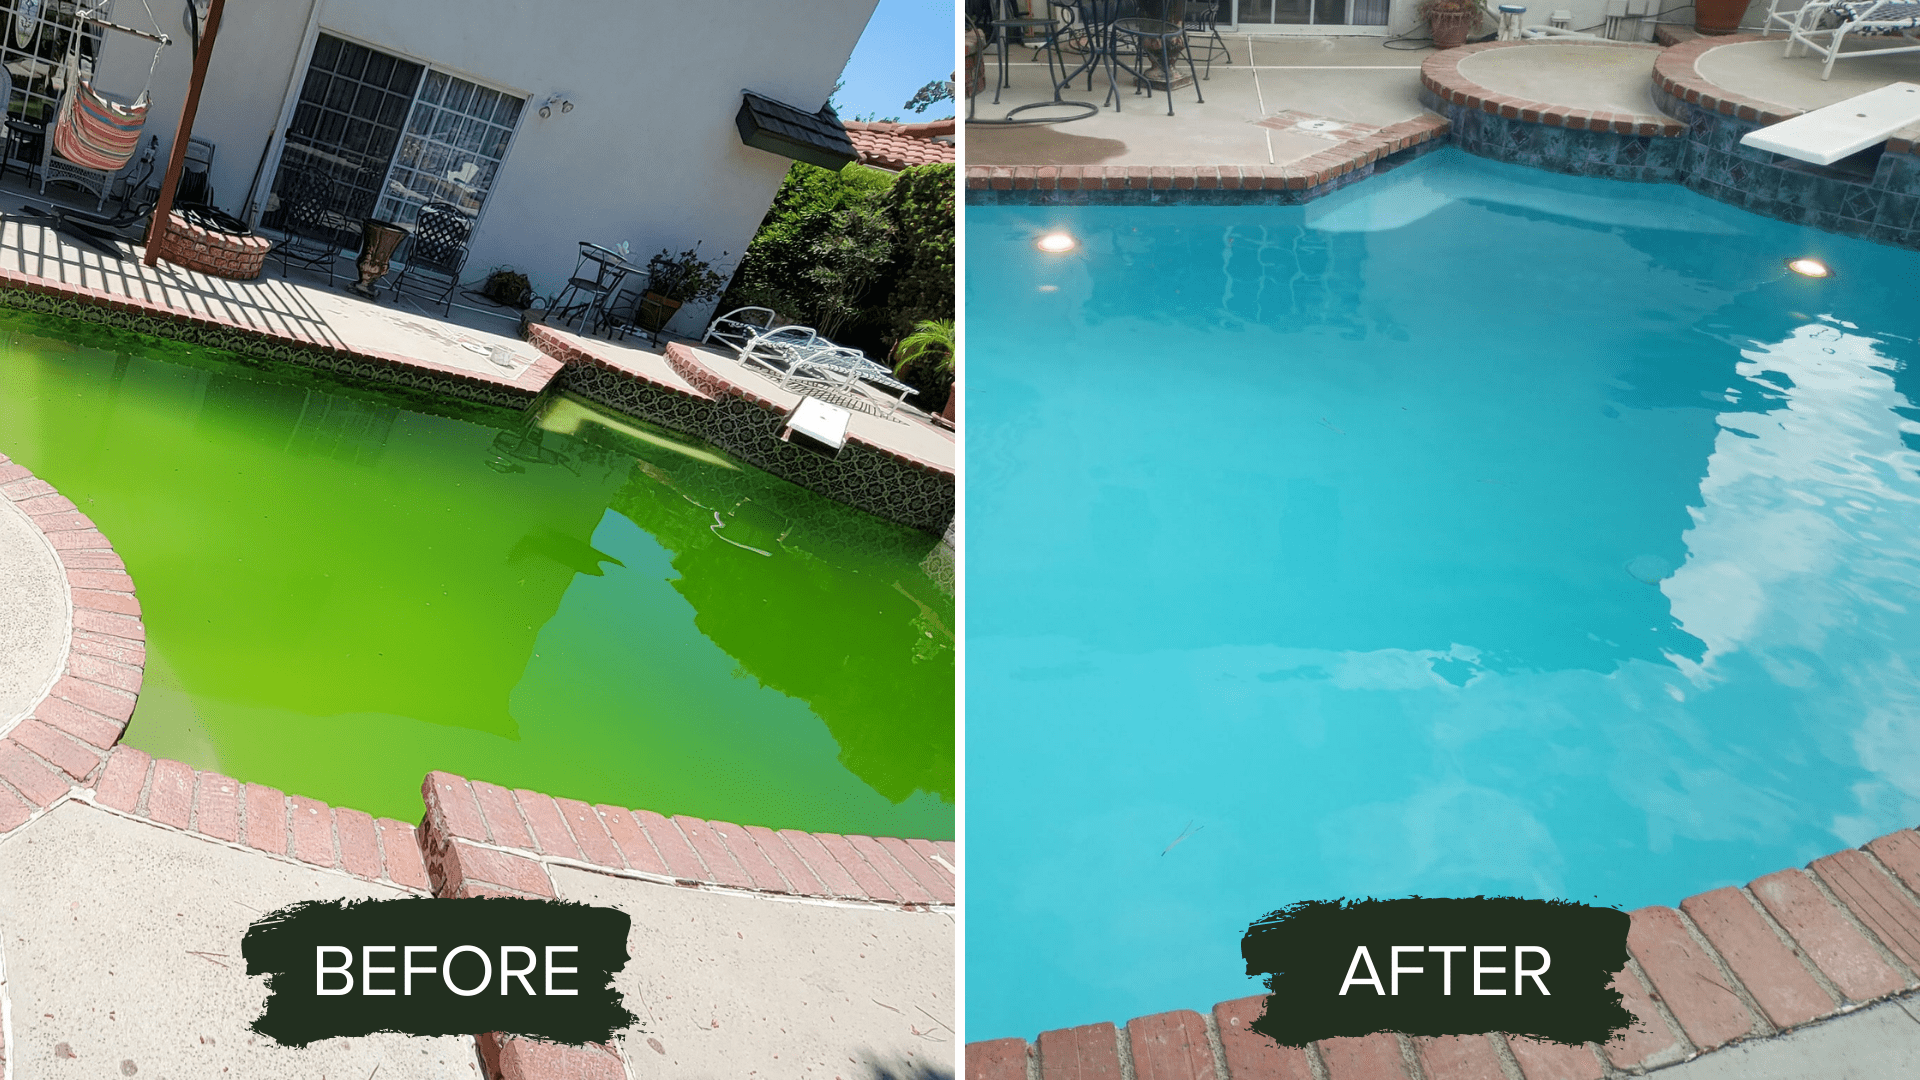 BEFORE AND AFTER POOL REMODEL